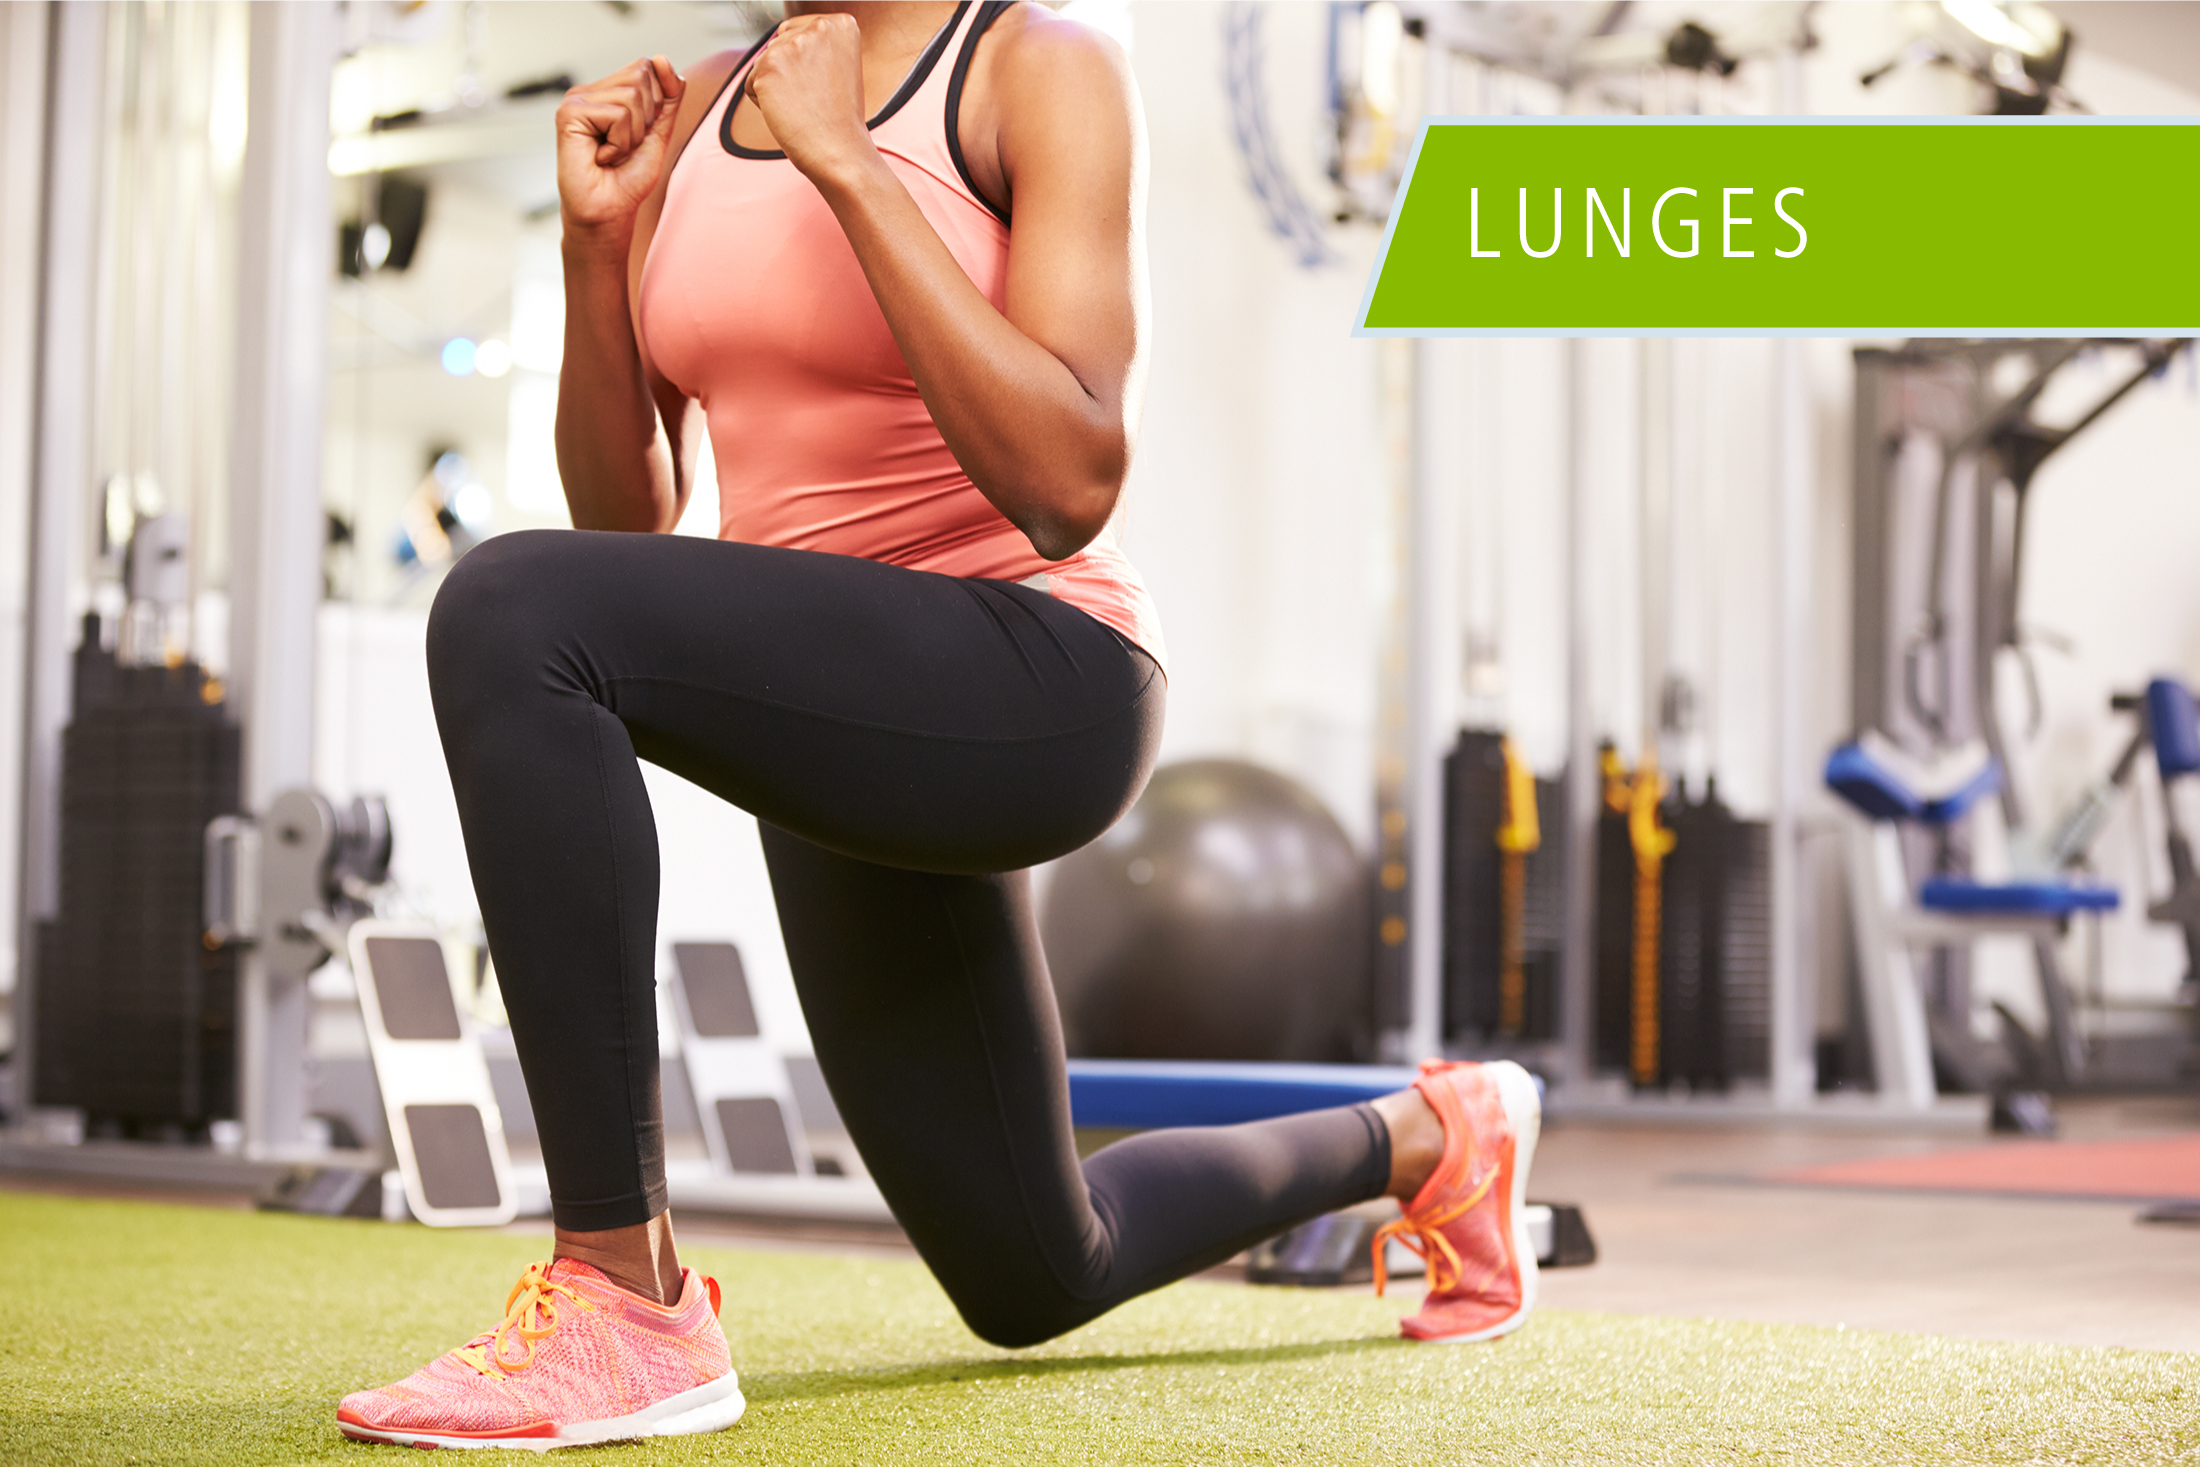 Lunges Exercises